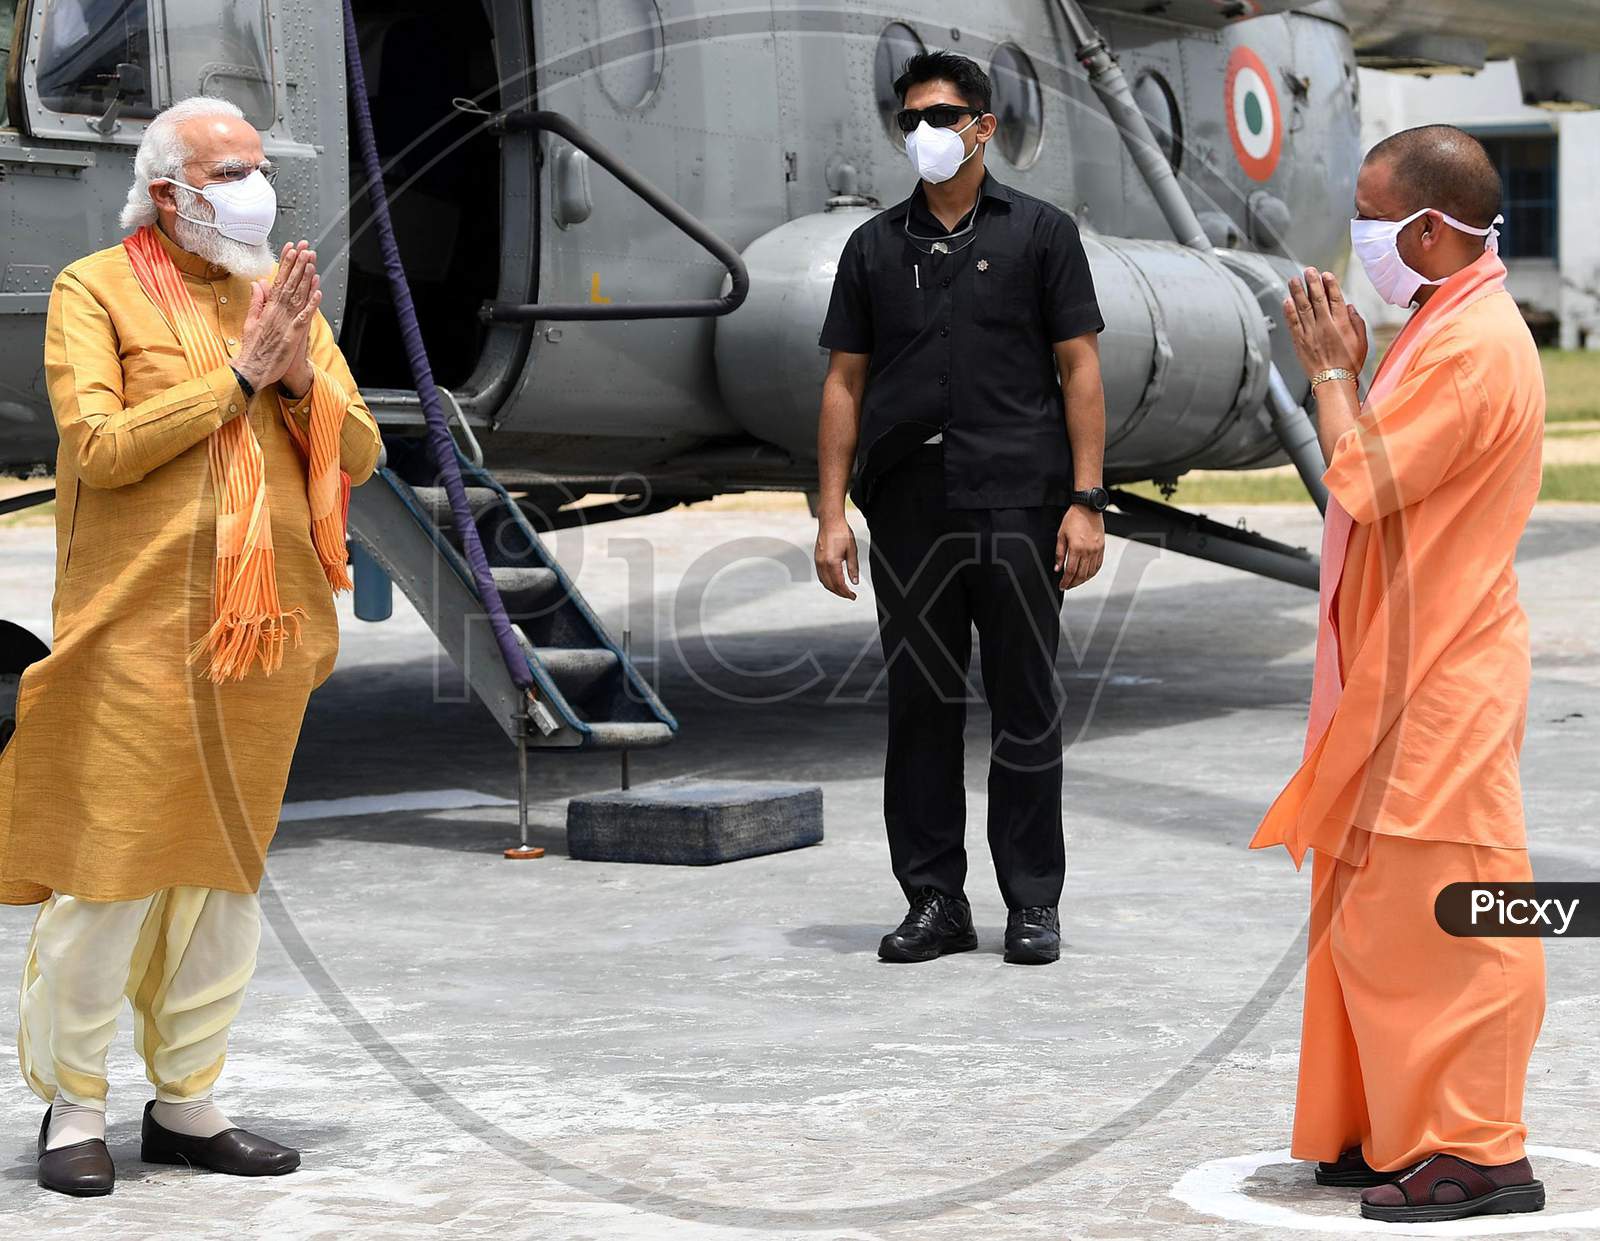 Uttar Pradesh Chief Minister Yogi Adityanath greets Prime Minister Narendra Modi as he arrives, ahead of the foundation laying ceremony for a Hindu Lord Ram's temple in Ayodhya, India, August 5, 2020.